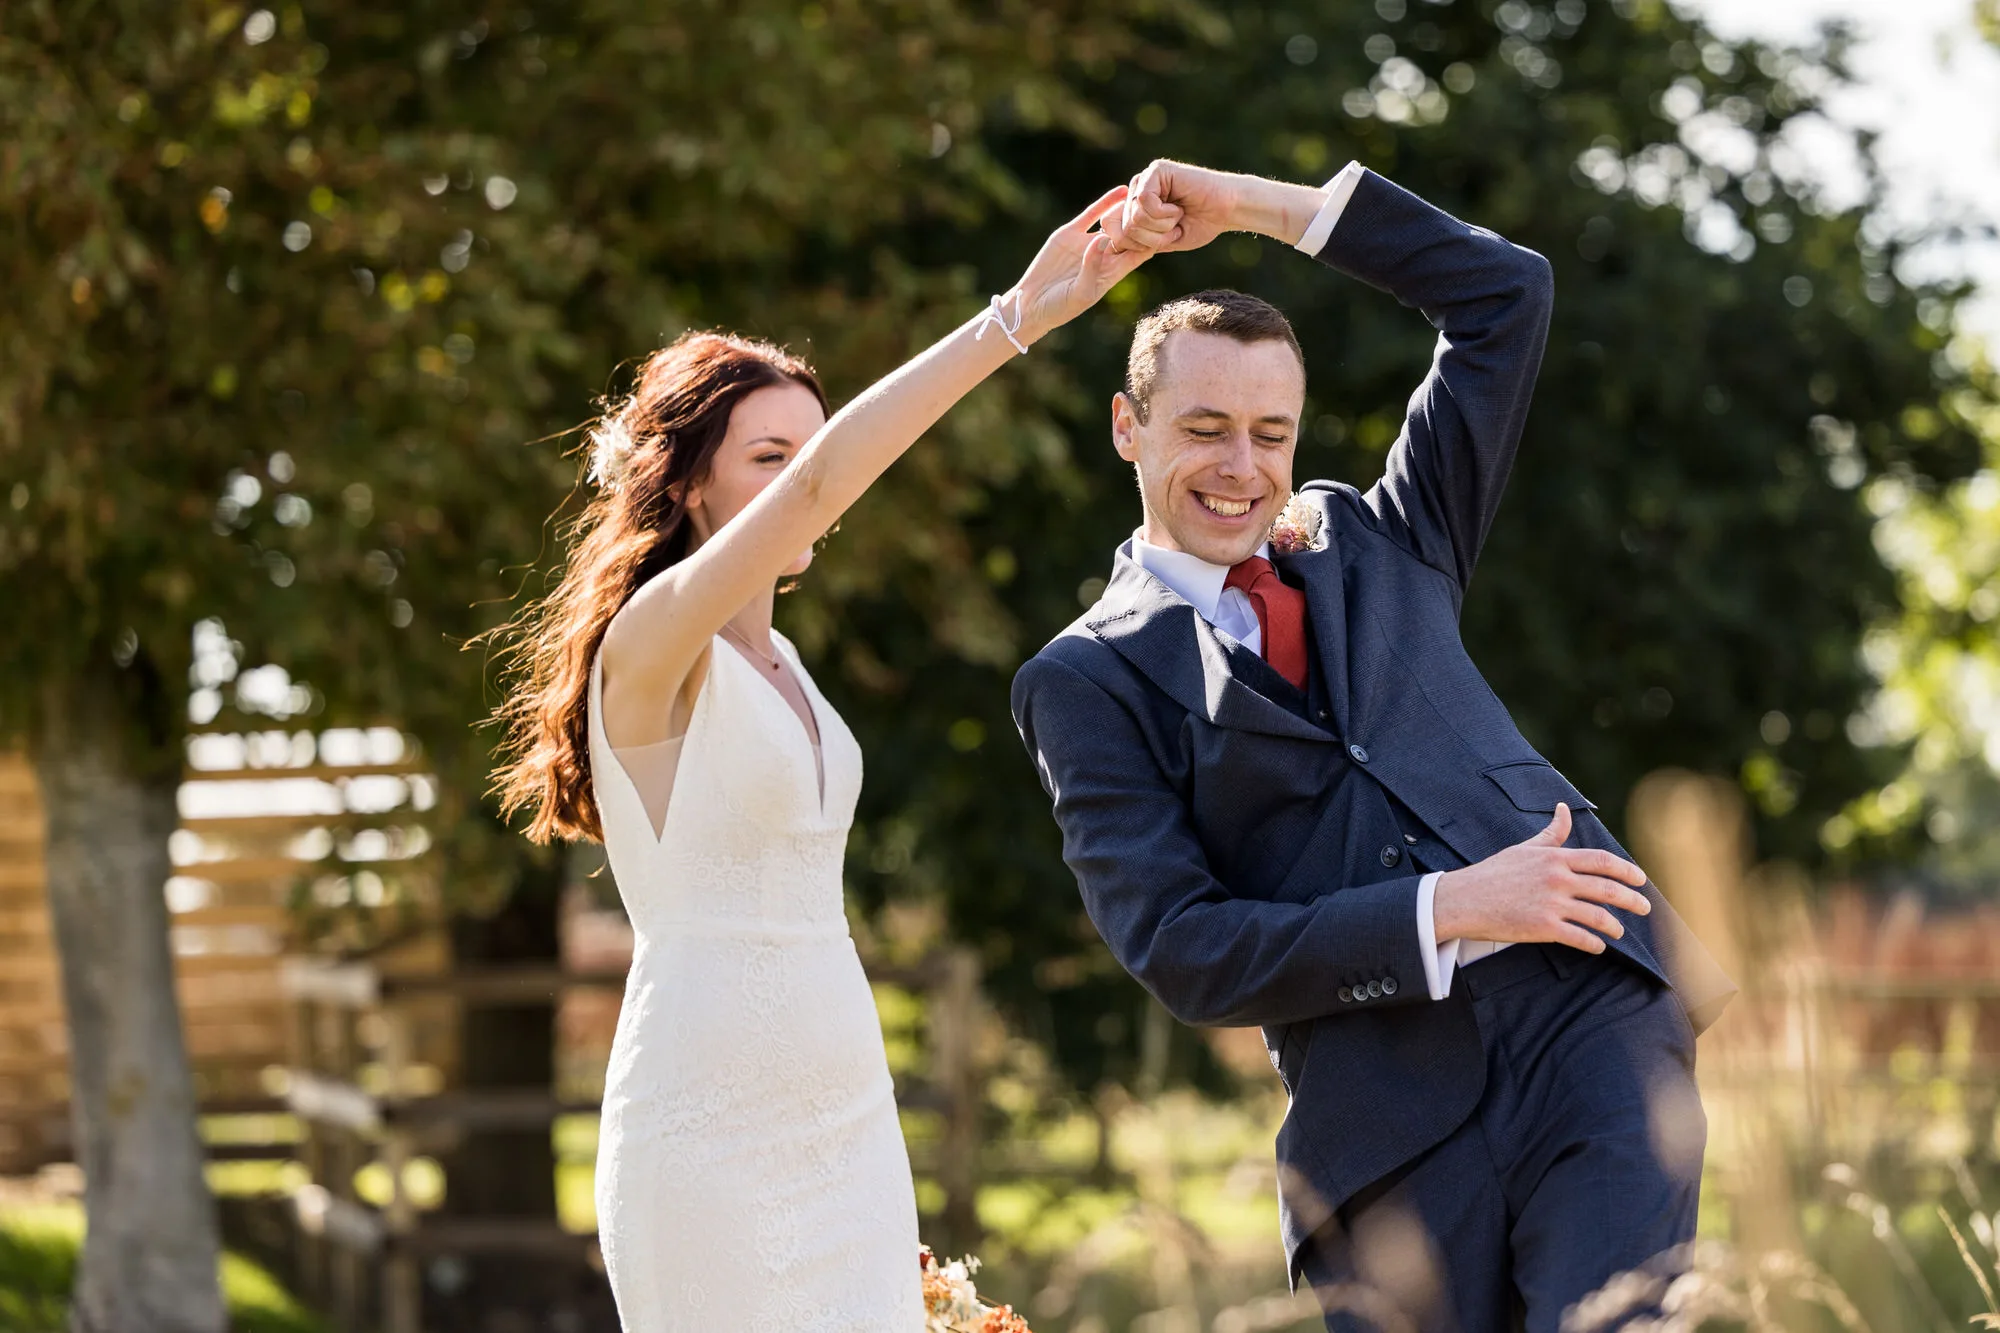 Hertfordshire wedding photographer - a man twirls in a dancefloor underneath his brides arm as they practised the first dance in the Hertfordshire countryside